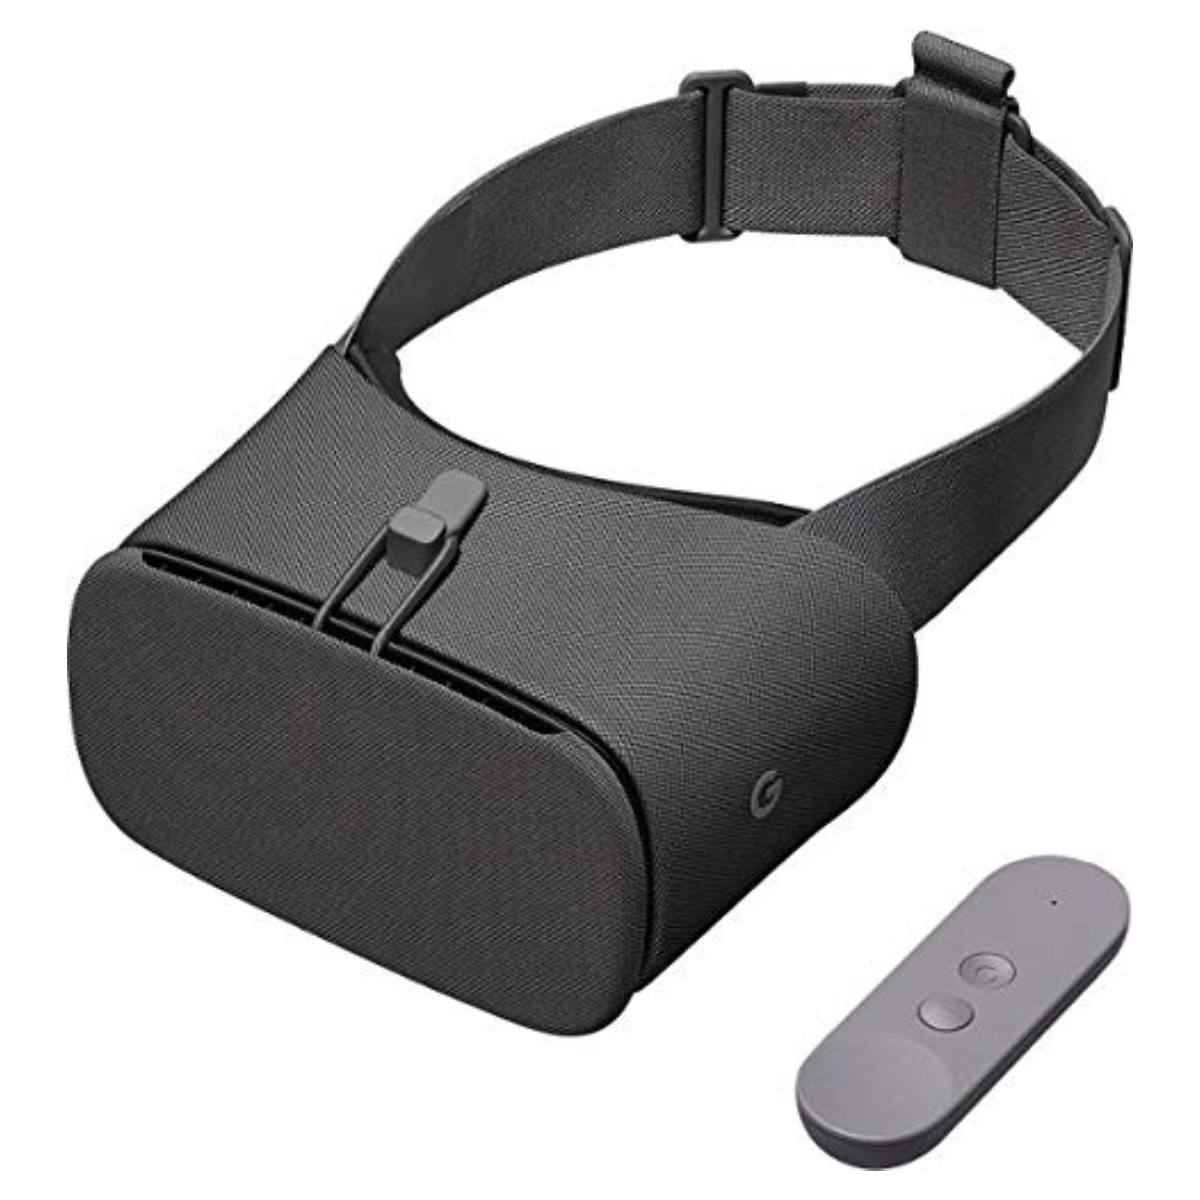 Do my best Adviser the same Best VR Headset in India (28 March 2022) - Digit.in